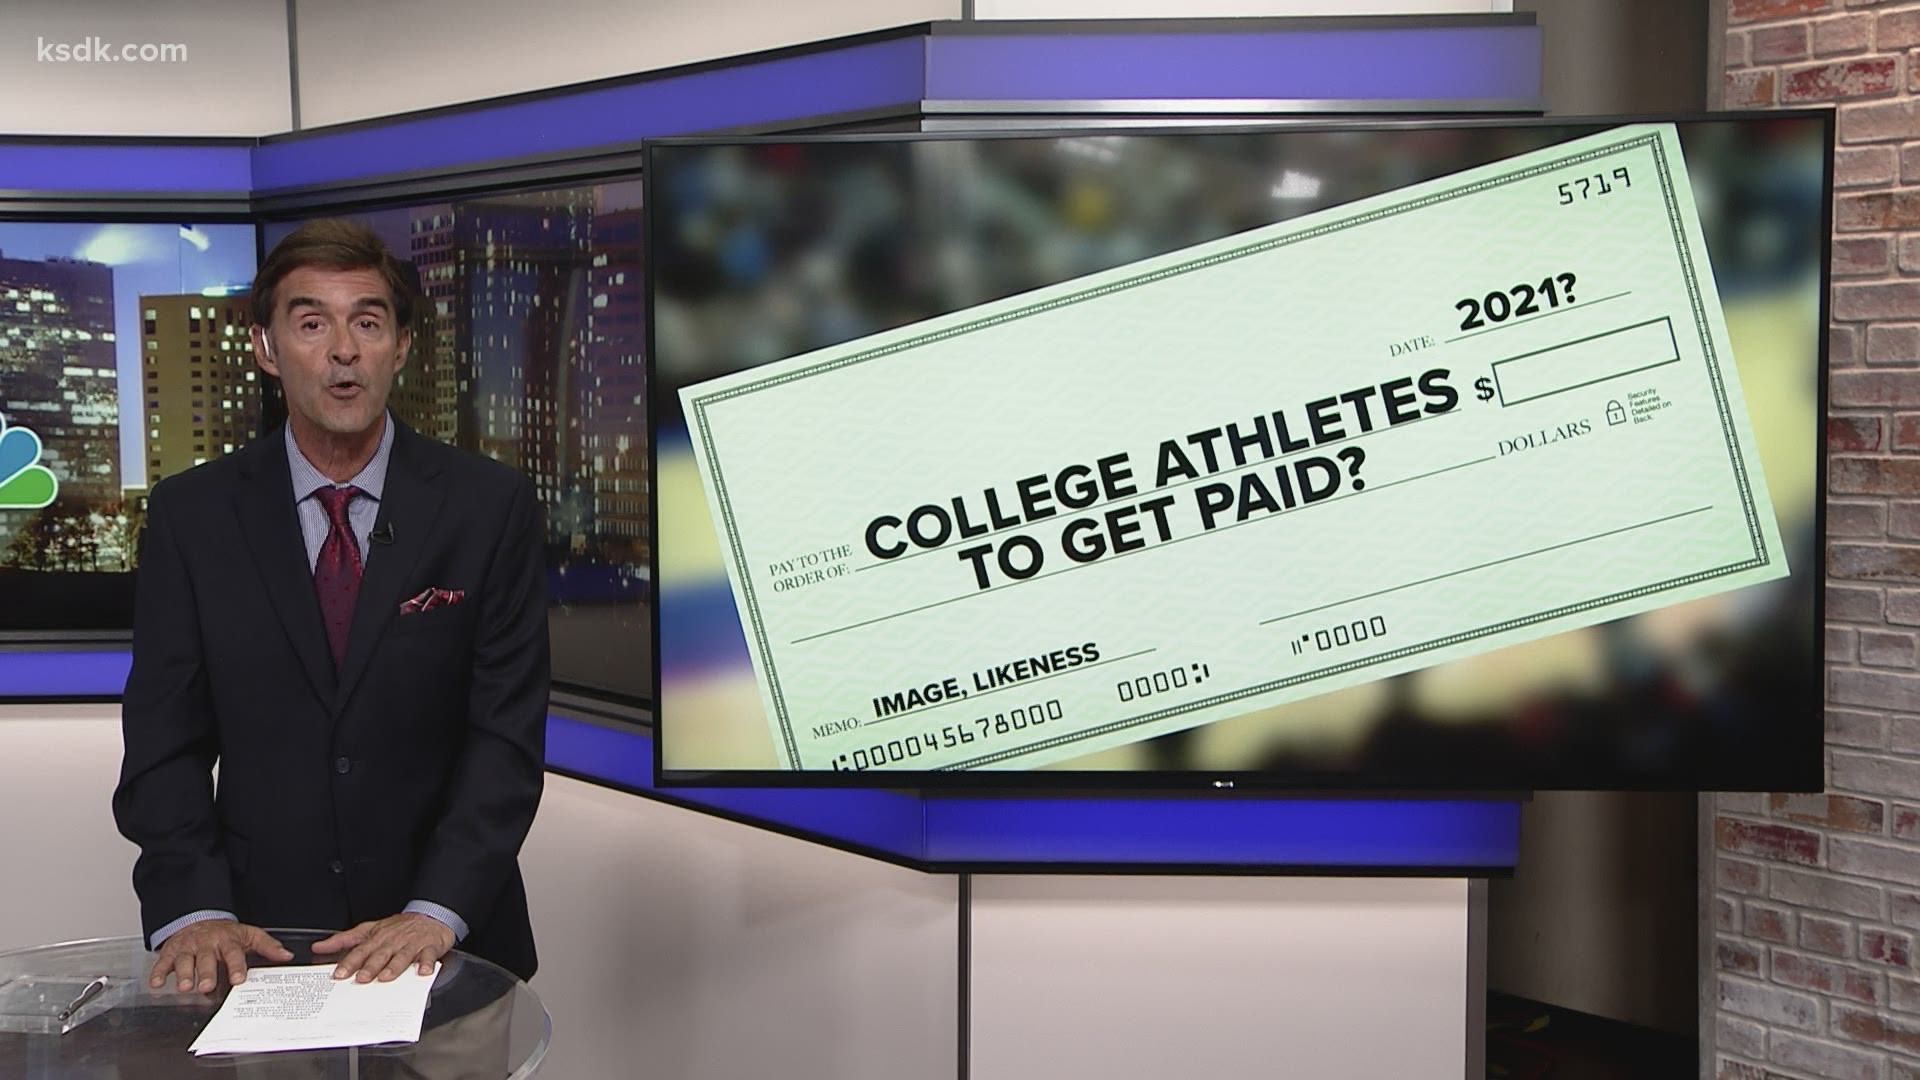 Frank gives his take on the NIL law when it comes to college athletes.